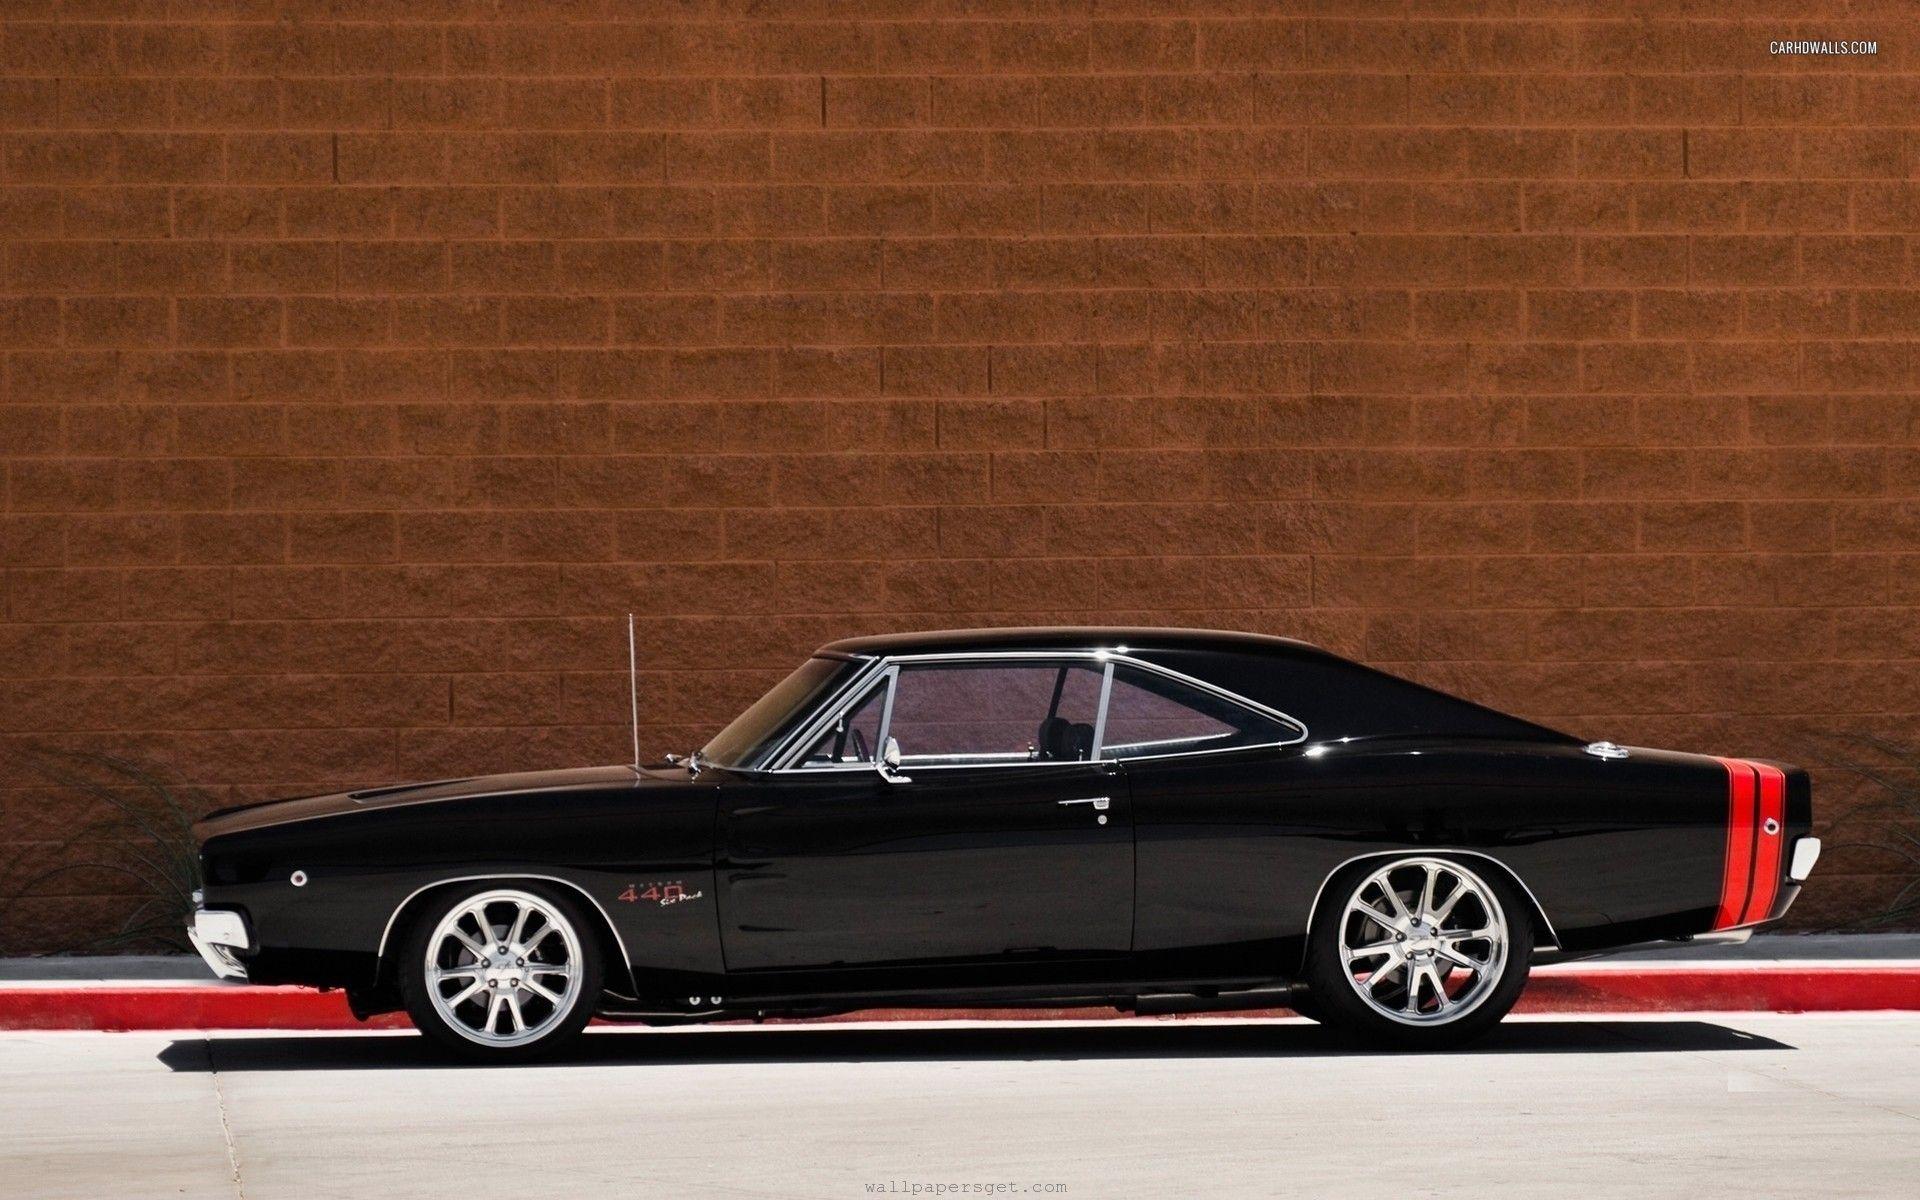 1969 dodge charger fast and furious side view